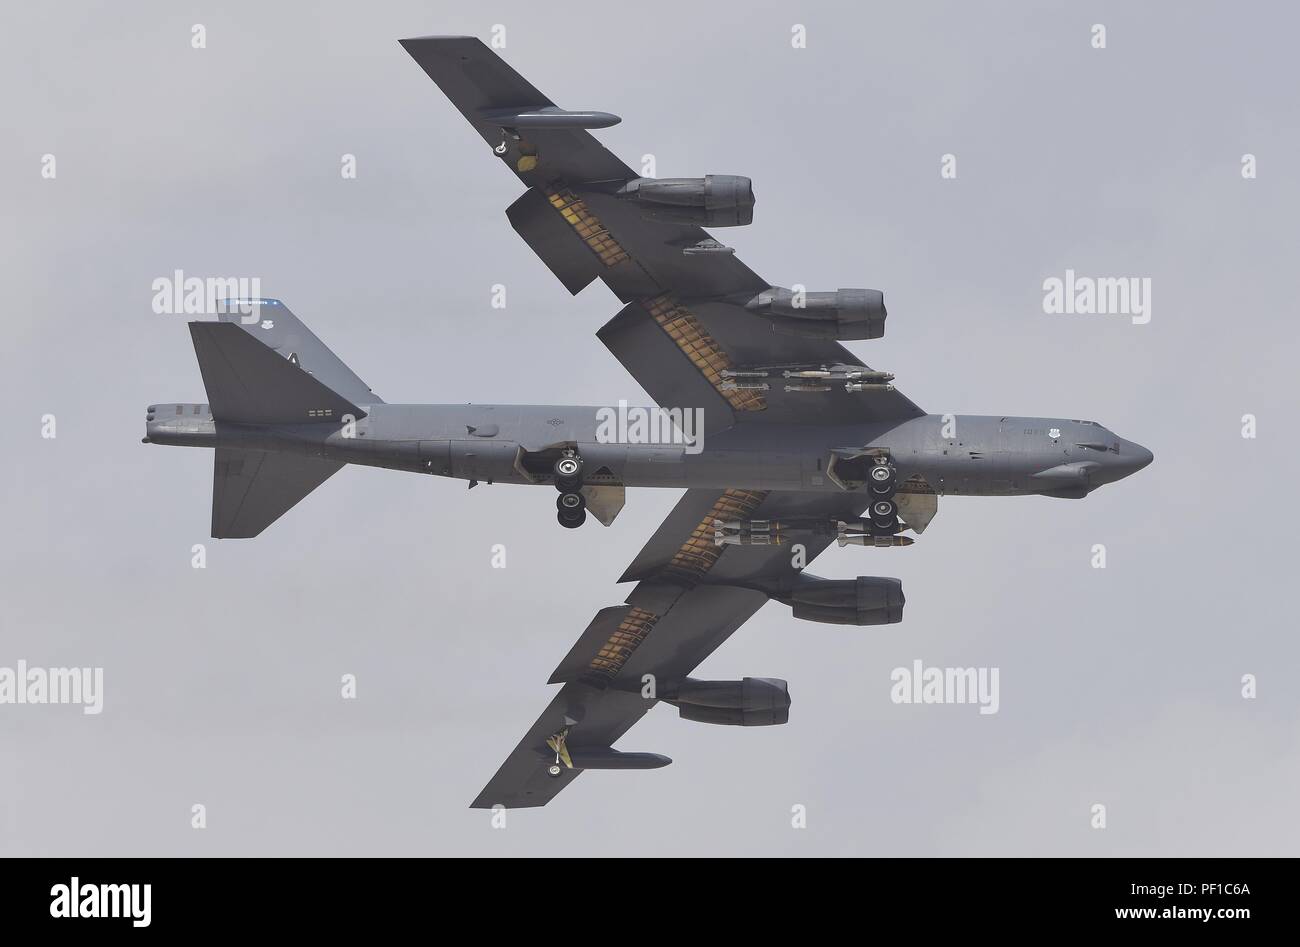 B-52 Bombers from Barksdale AFB deployed to Al Udeid Air Force Base in Qatar during Operation Inherent Resolve Stock Photo